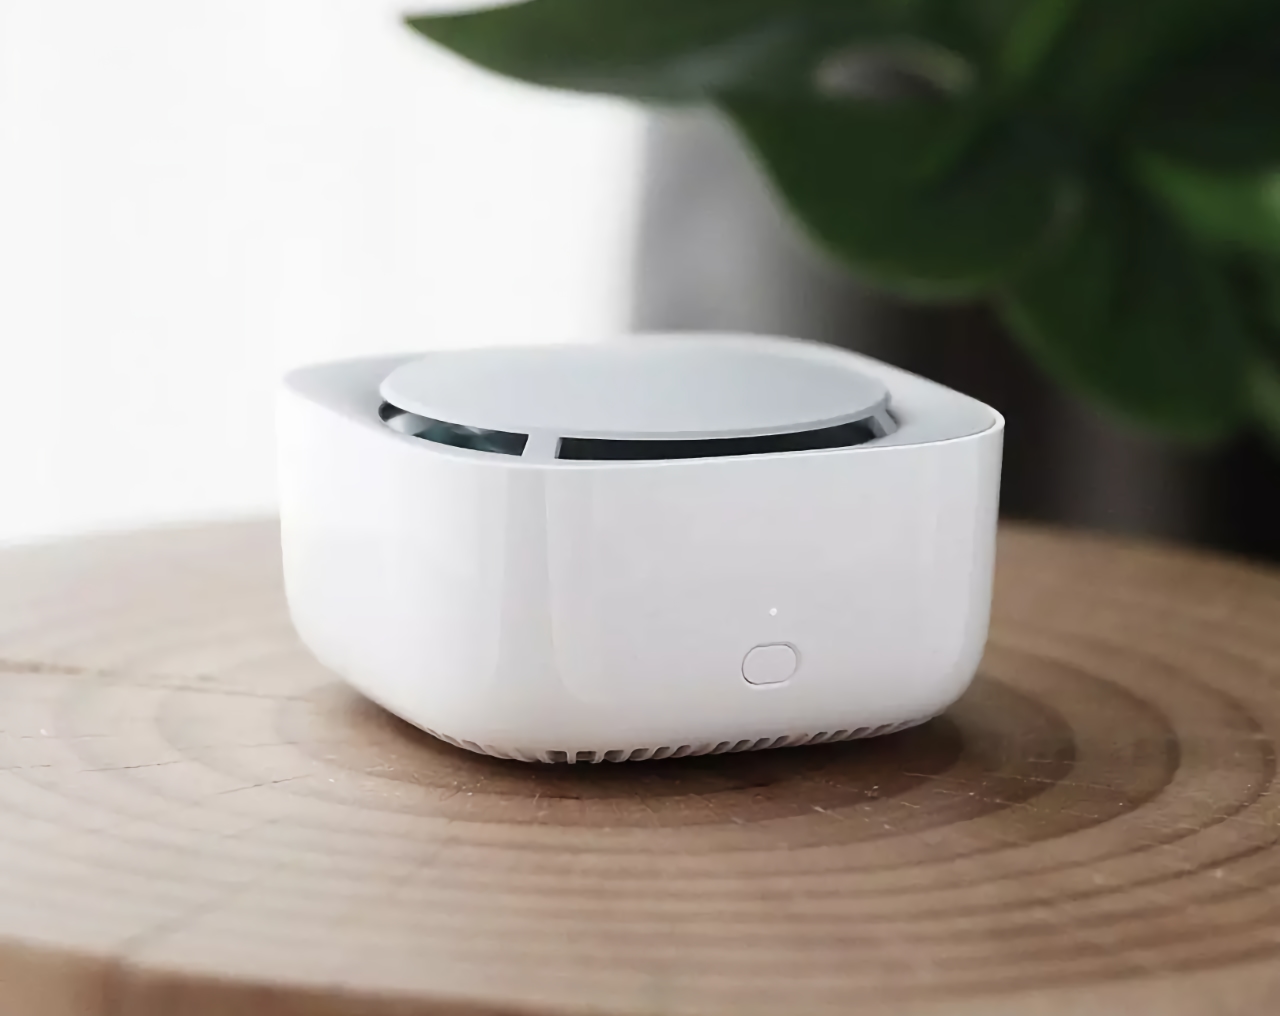 Xiaomi introduced MiJia Smart Mosquito Repellant 2: a smart fumigator with Bluetooth and voice assistant for $9